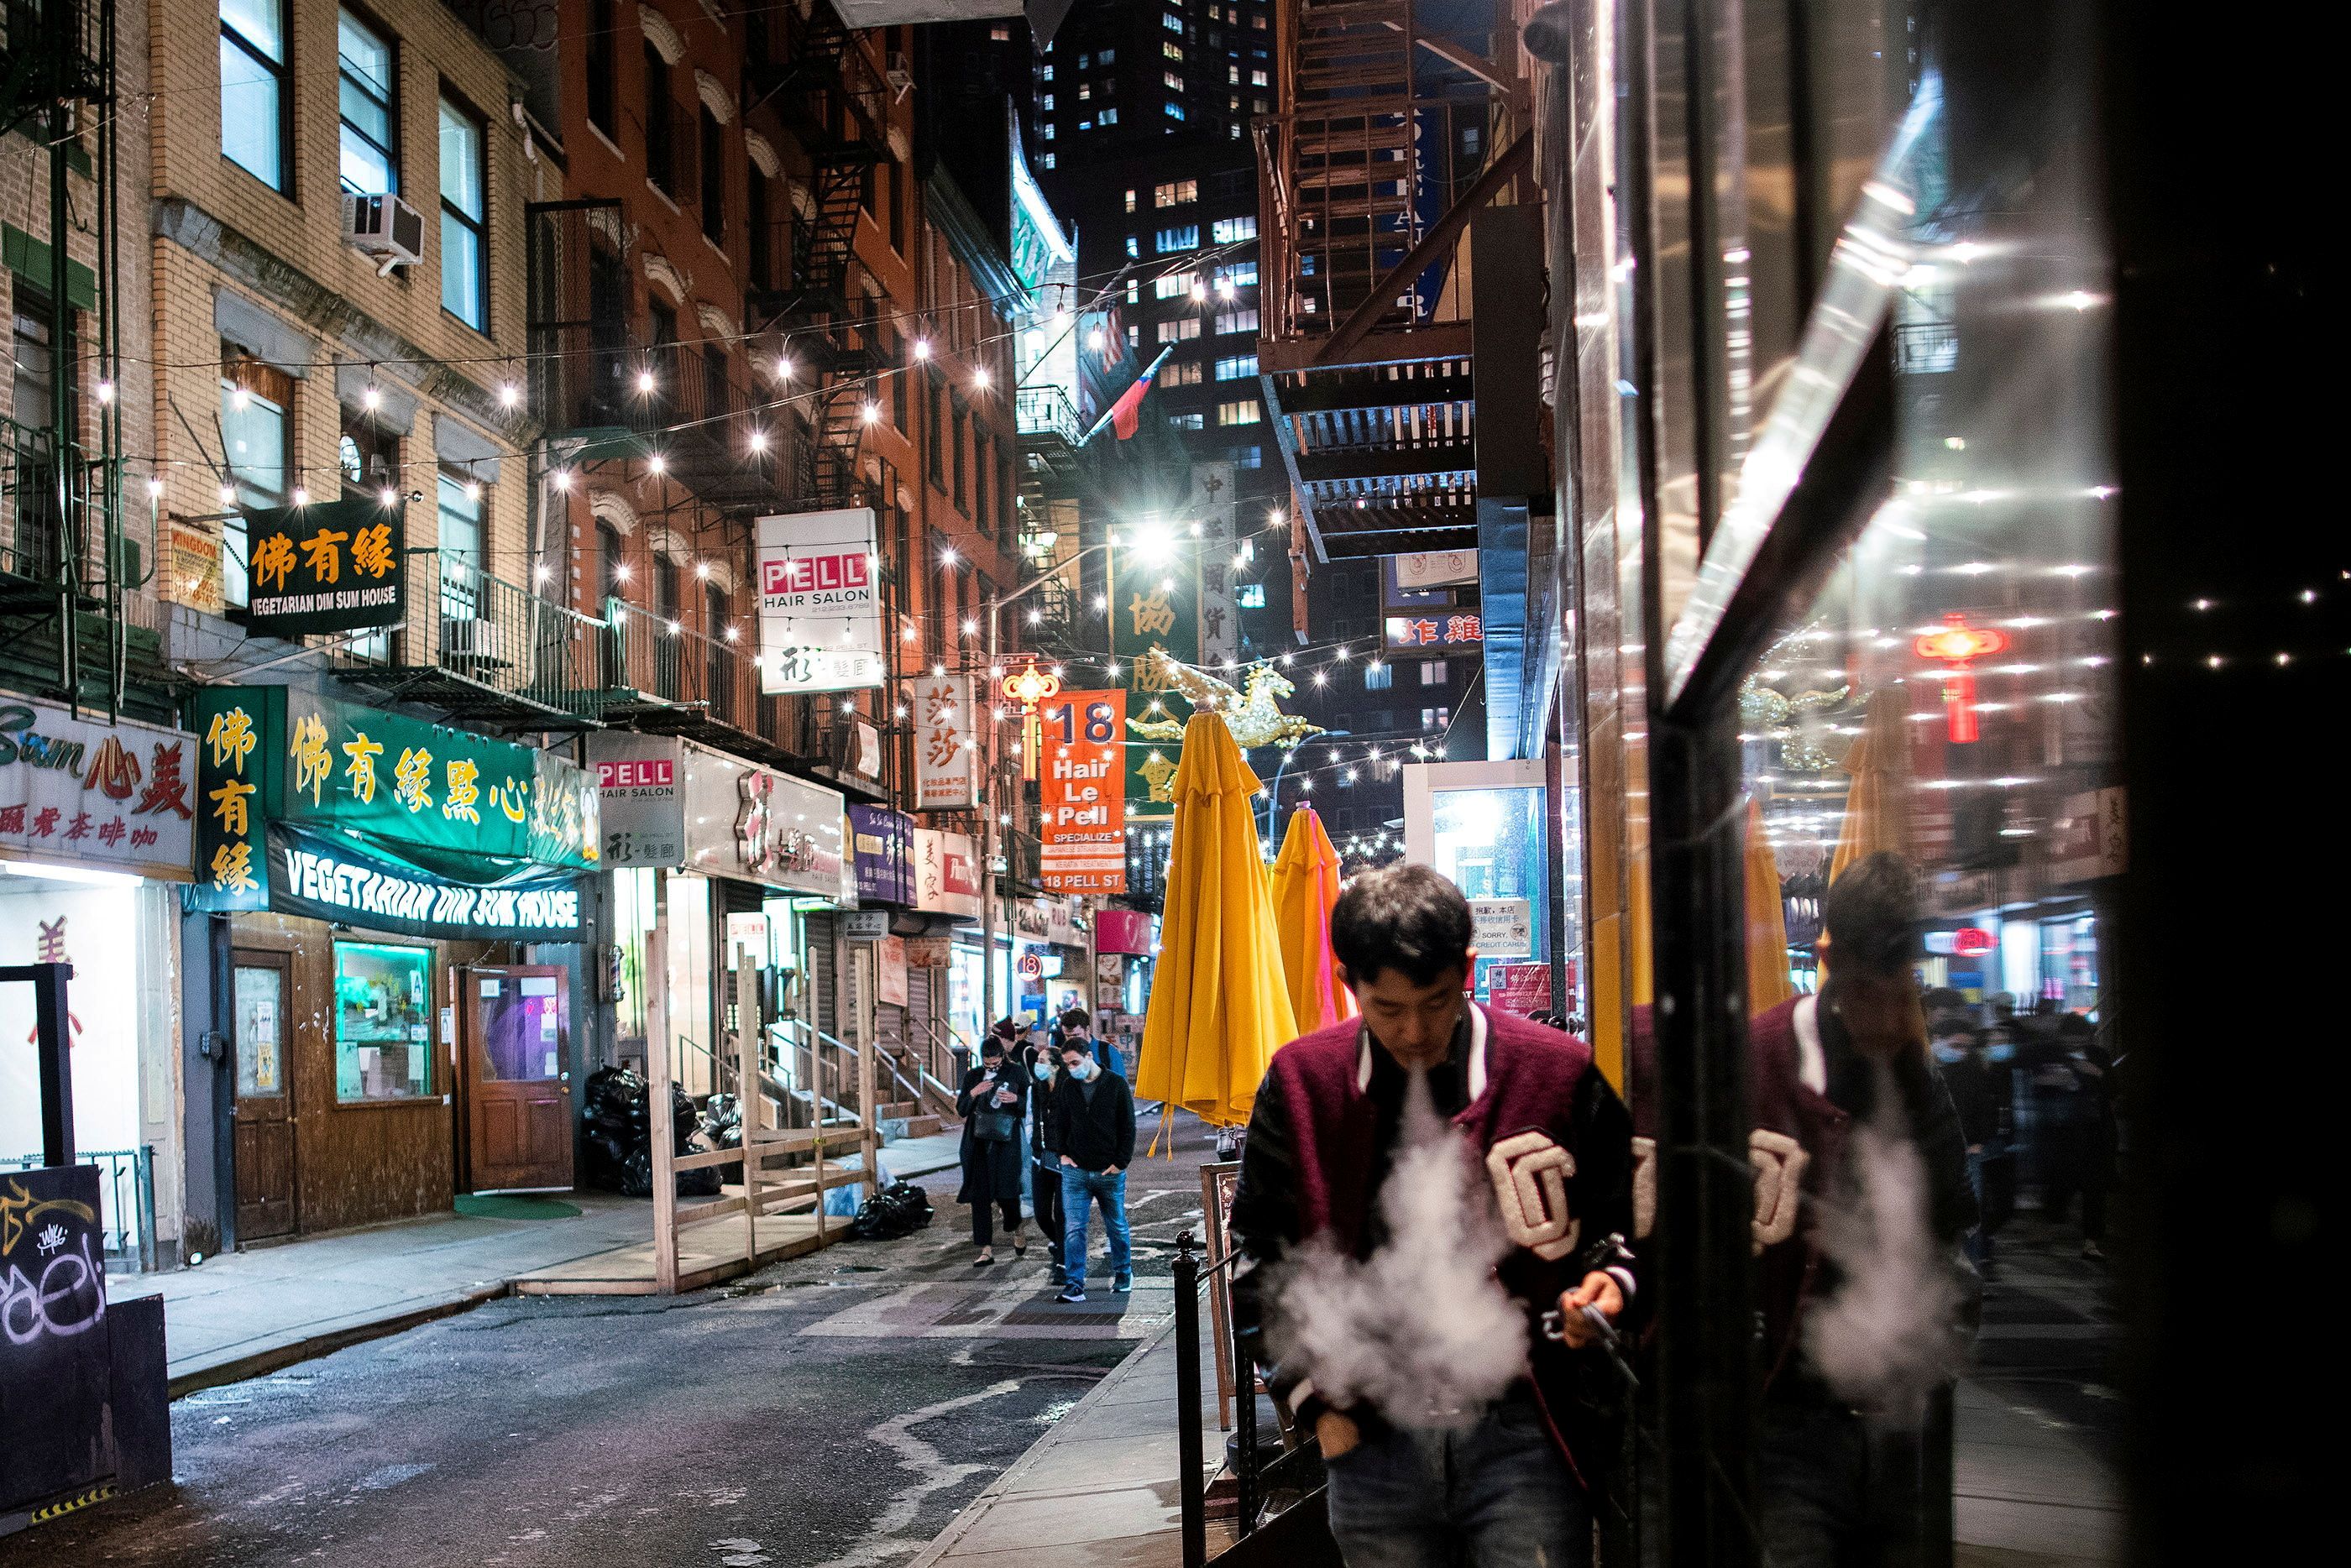 People make their way in a local street of Chinatown in the Manhattan borough of New York